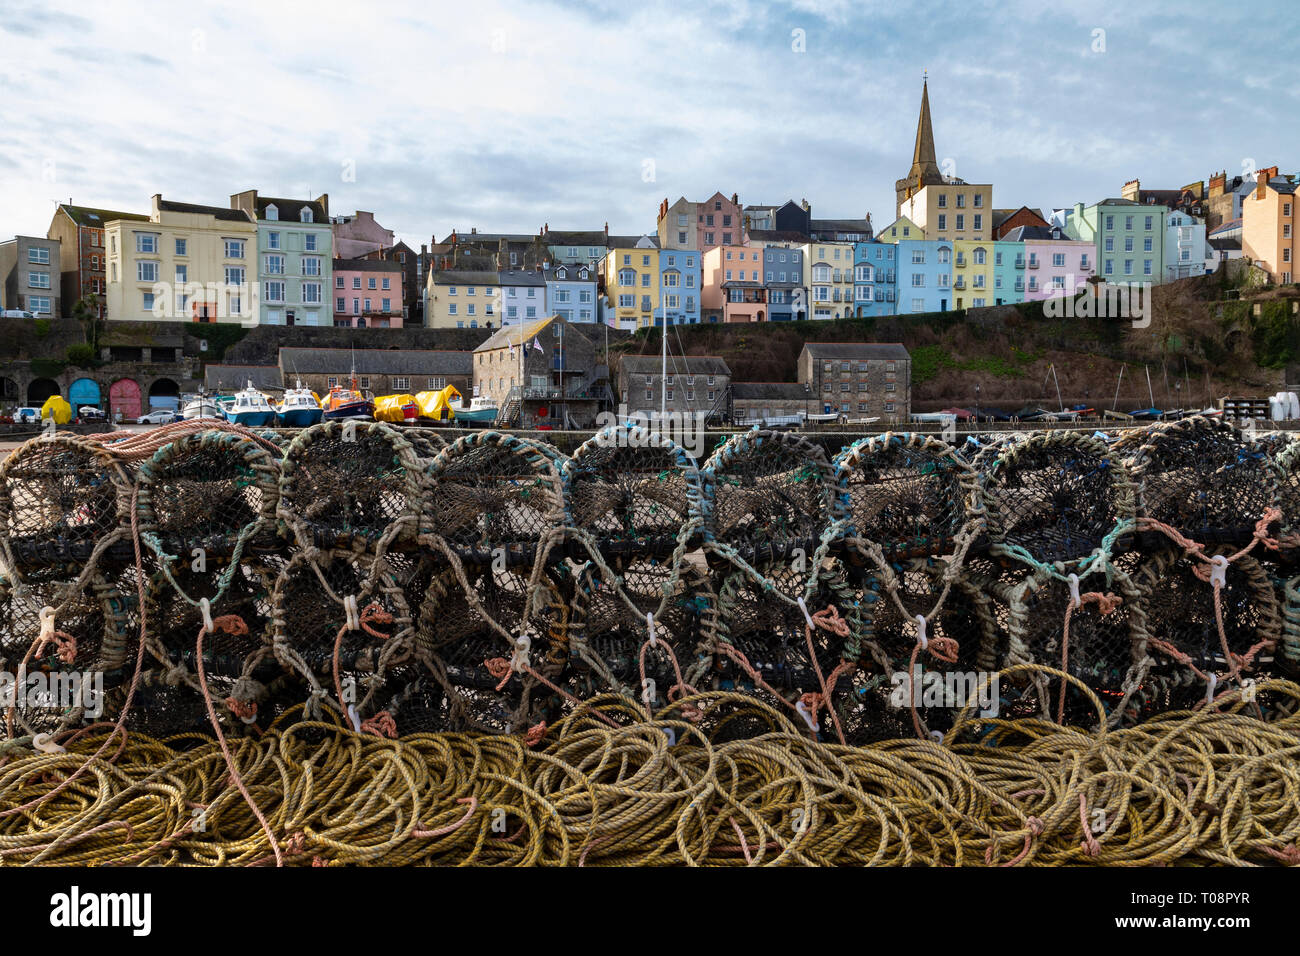 Tenby harbor in Carmarthen Bay - Tenby in Pembrokeshire on the south coast of Wales in the United Kingdom. Stock Photo